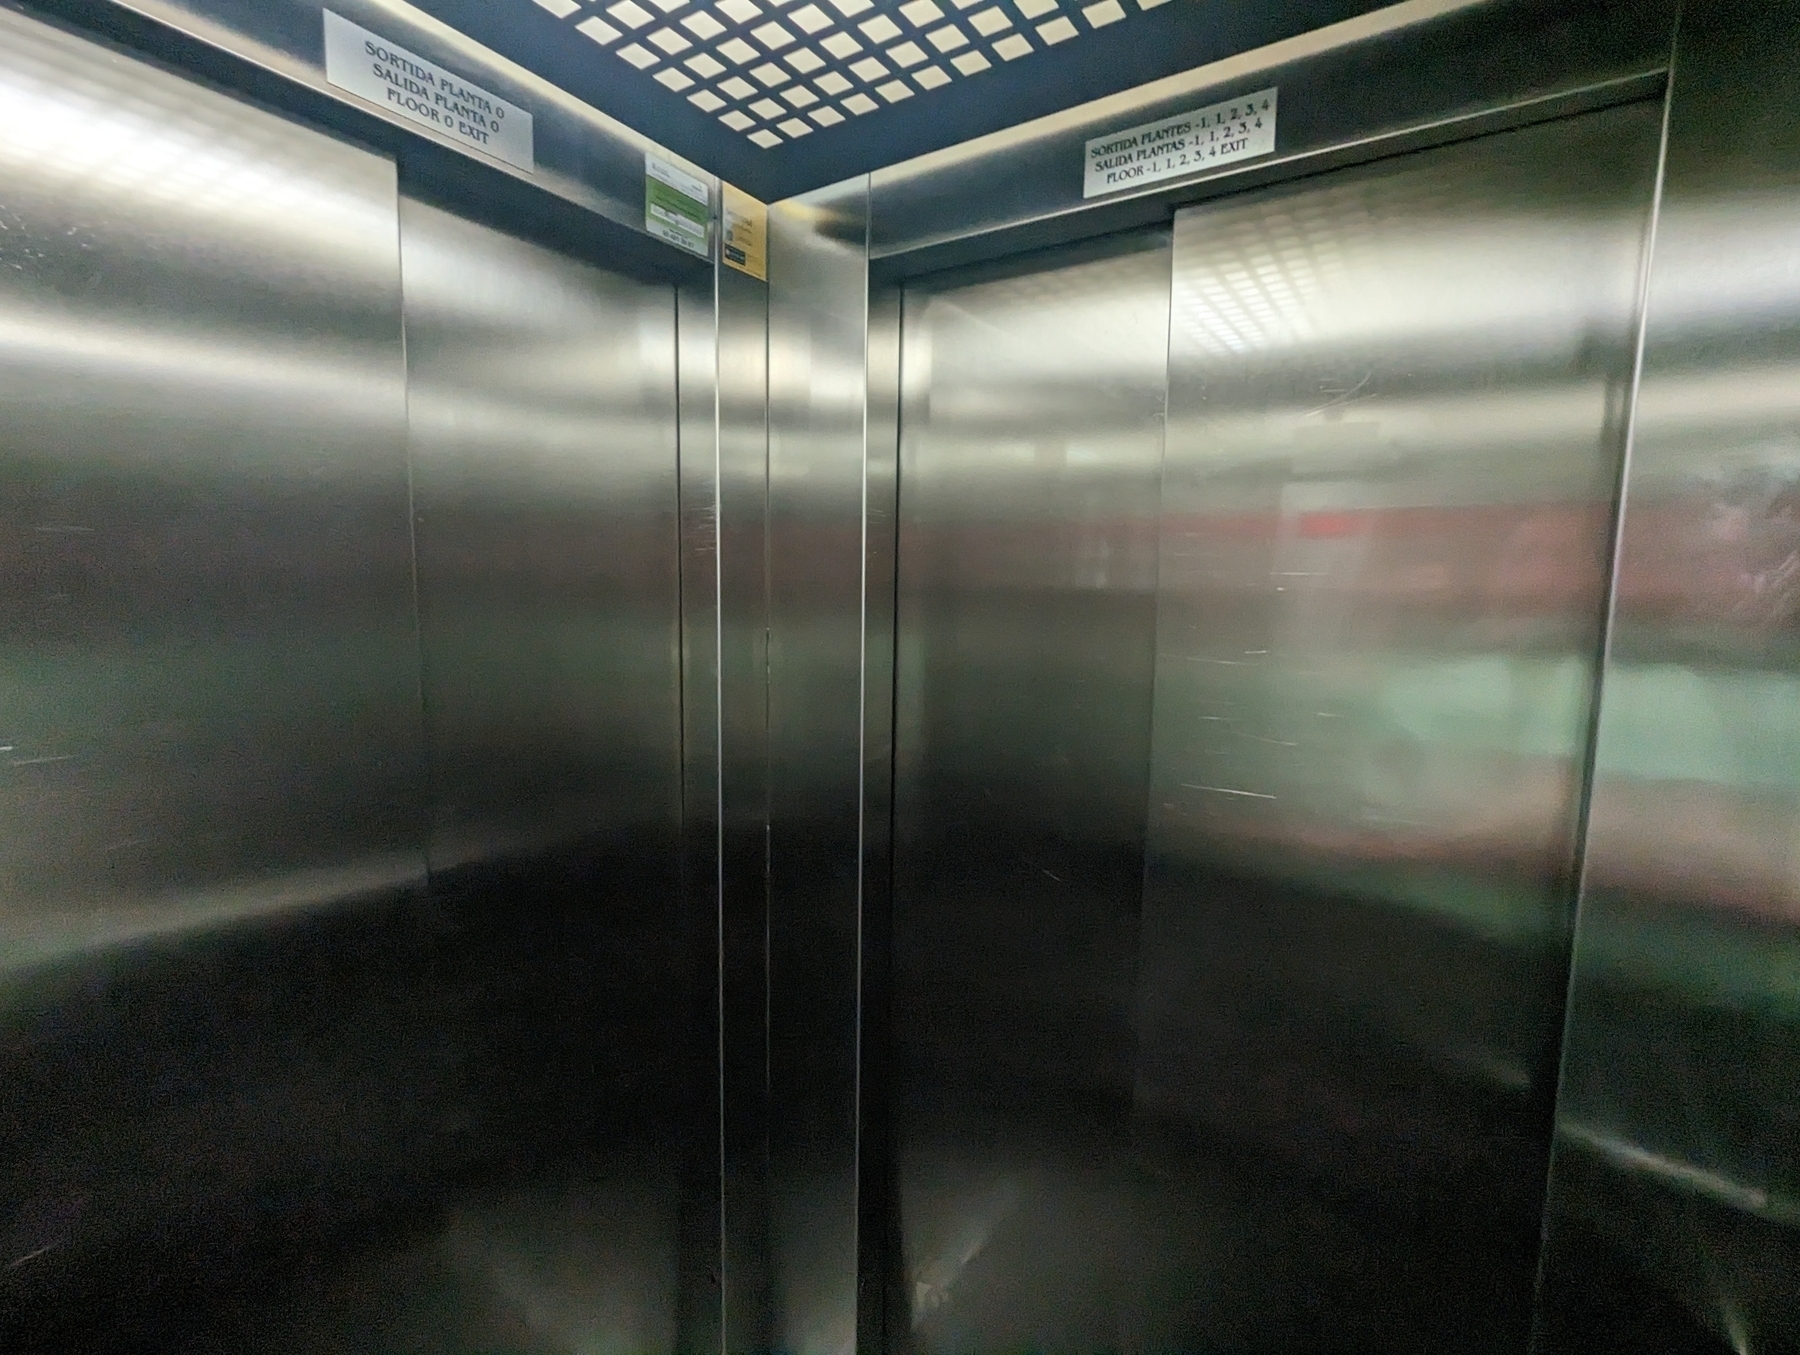 Inside of lift cart with two silver doors next to each other.